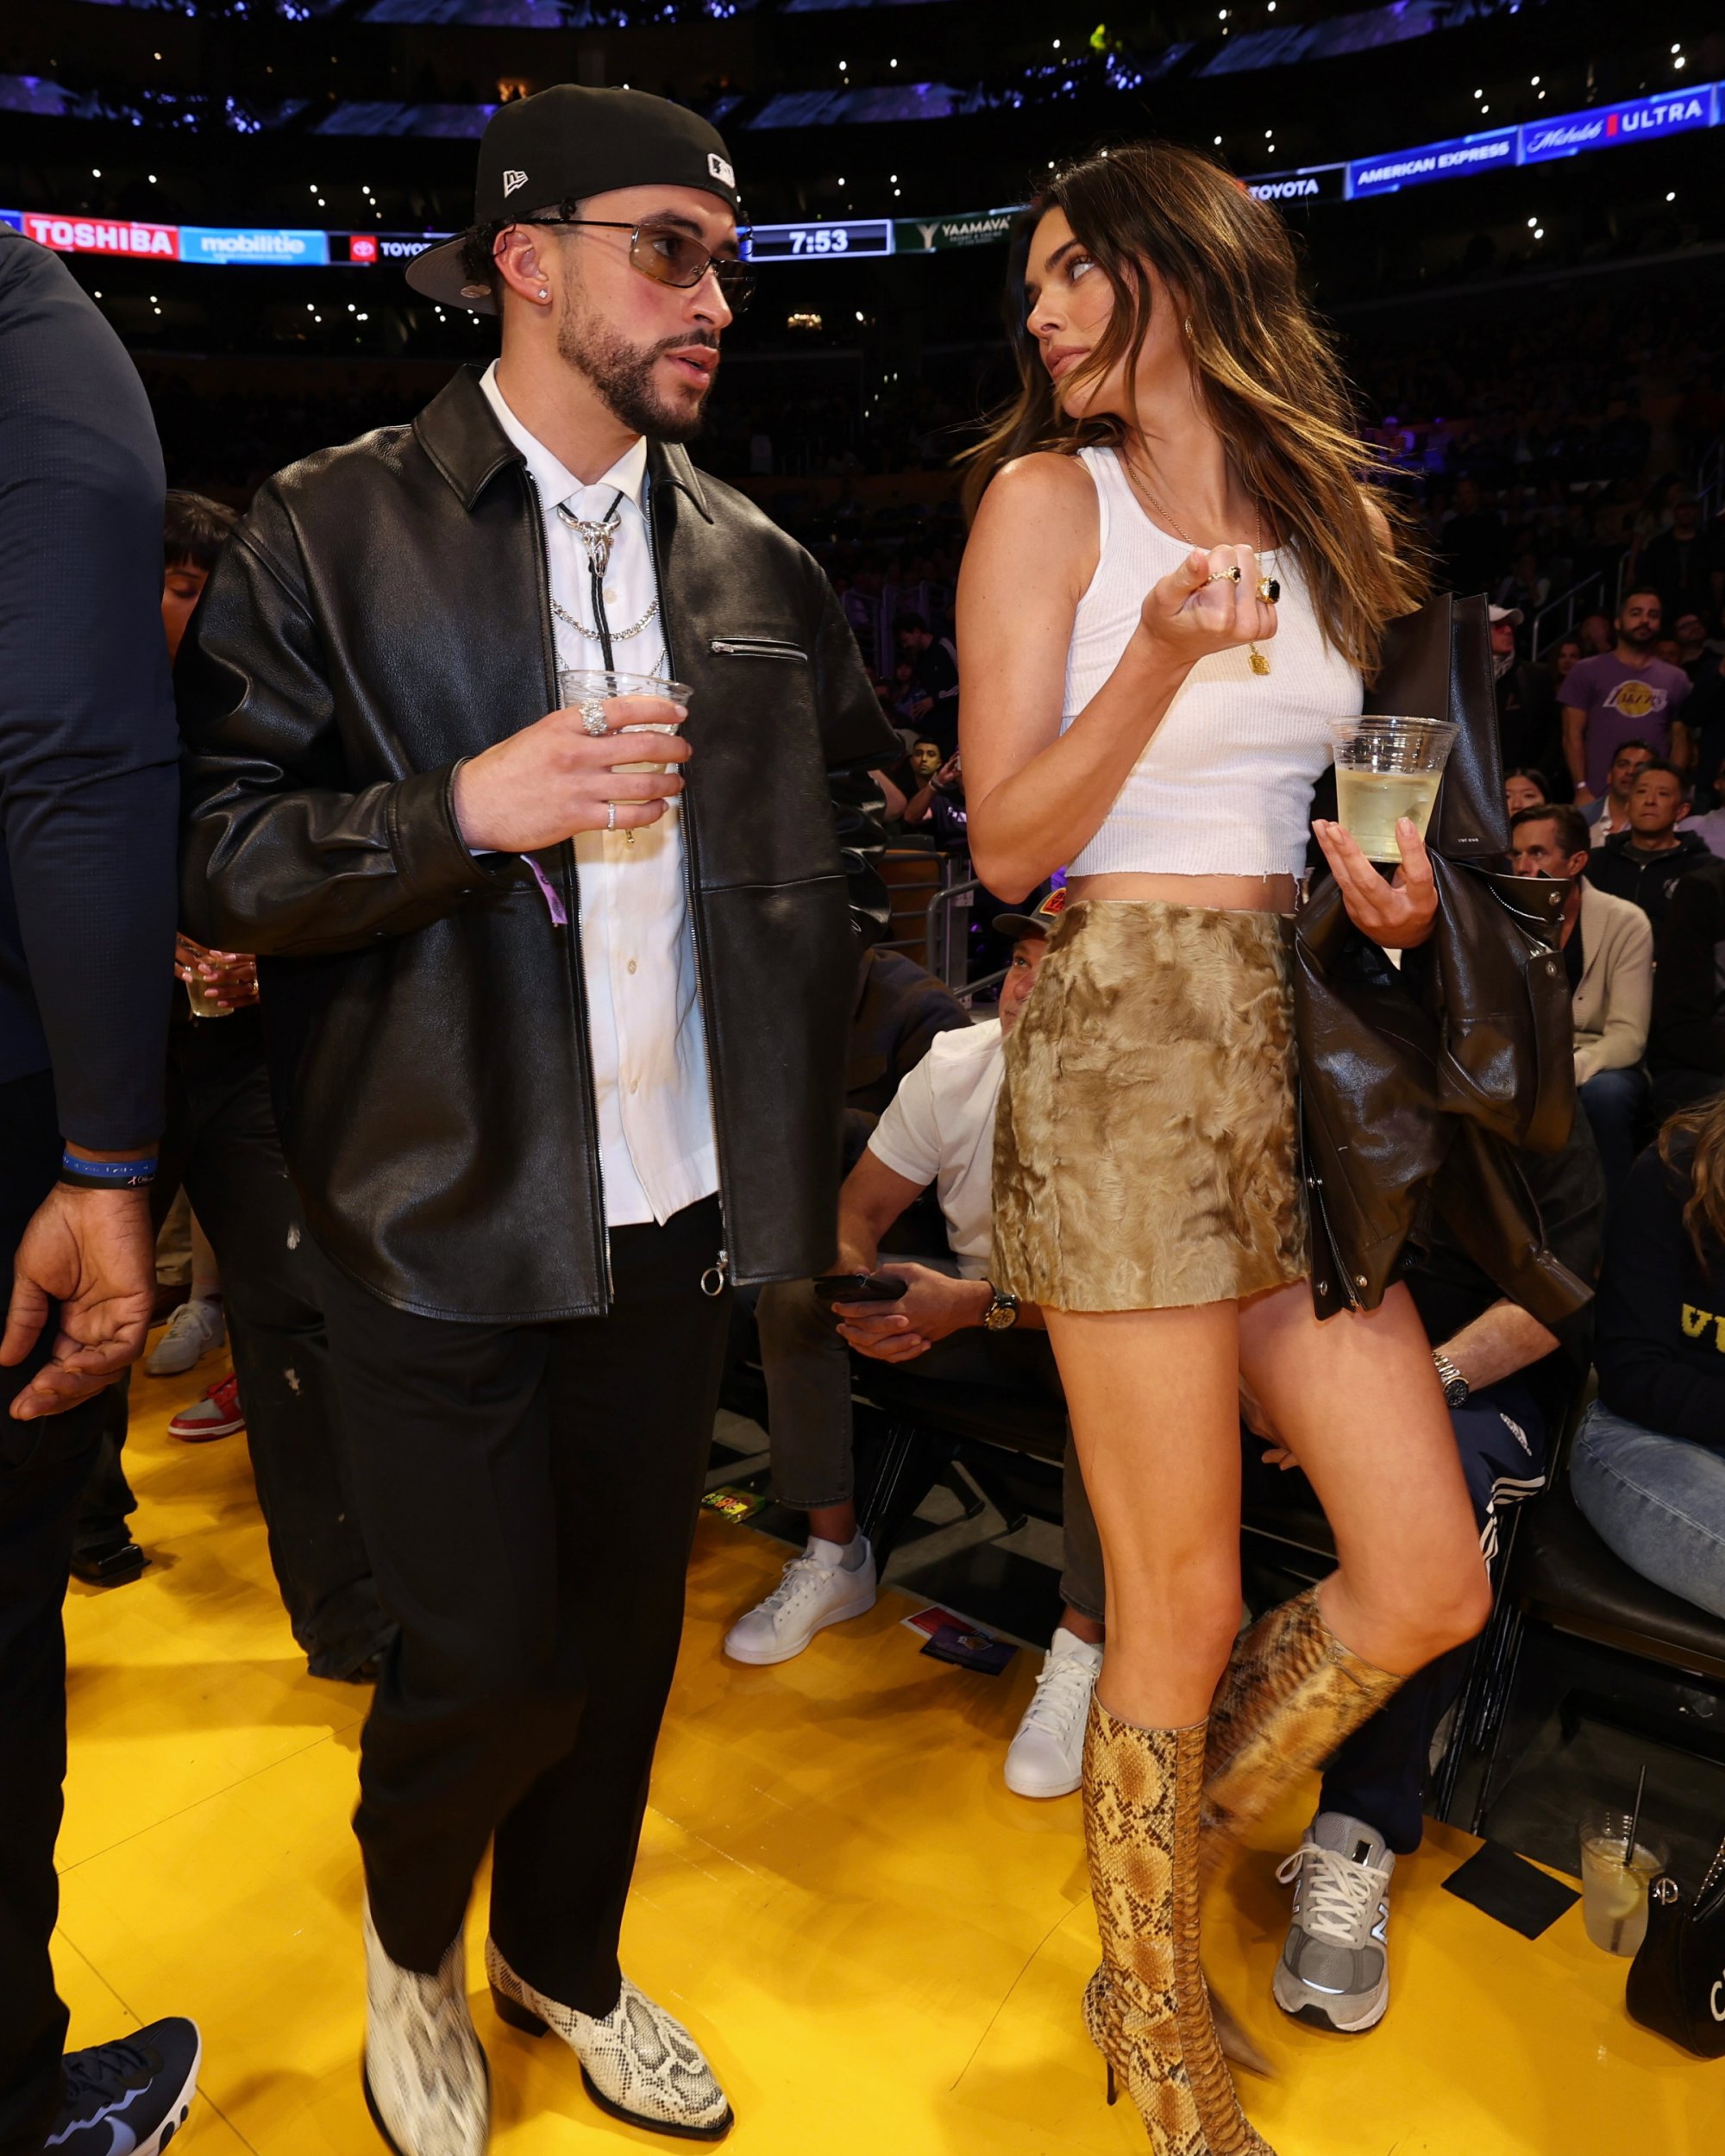 Bad Bunny and Kendall Jenner at the 2023 NBA Playoffs between Golden State Warriors and the Los Angeles Lakers on May 12, 2023, in Los Angeles, California